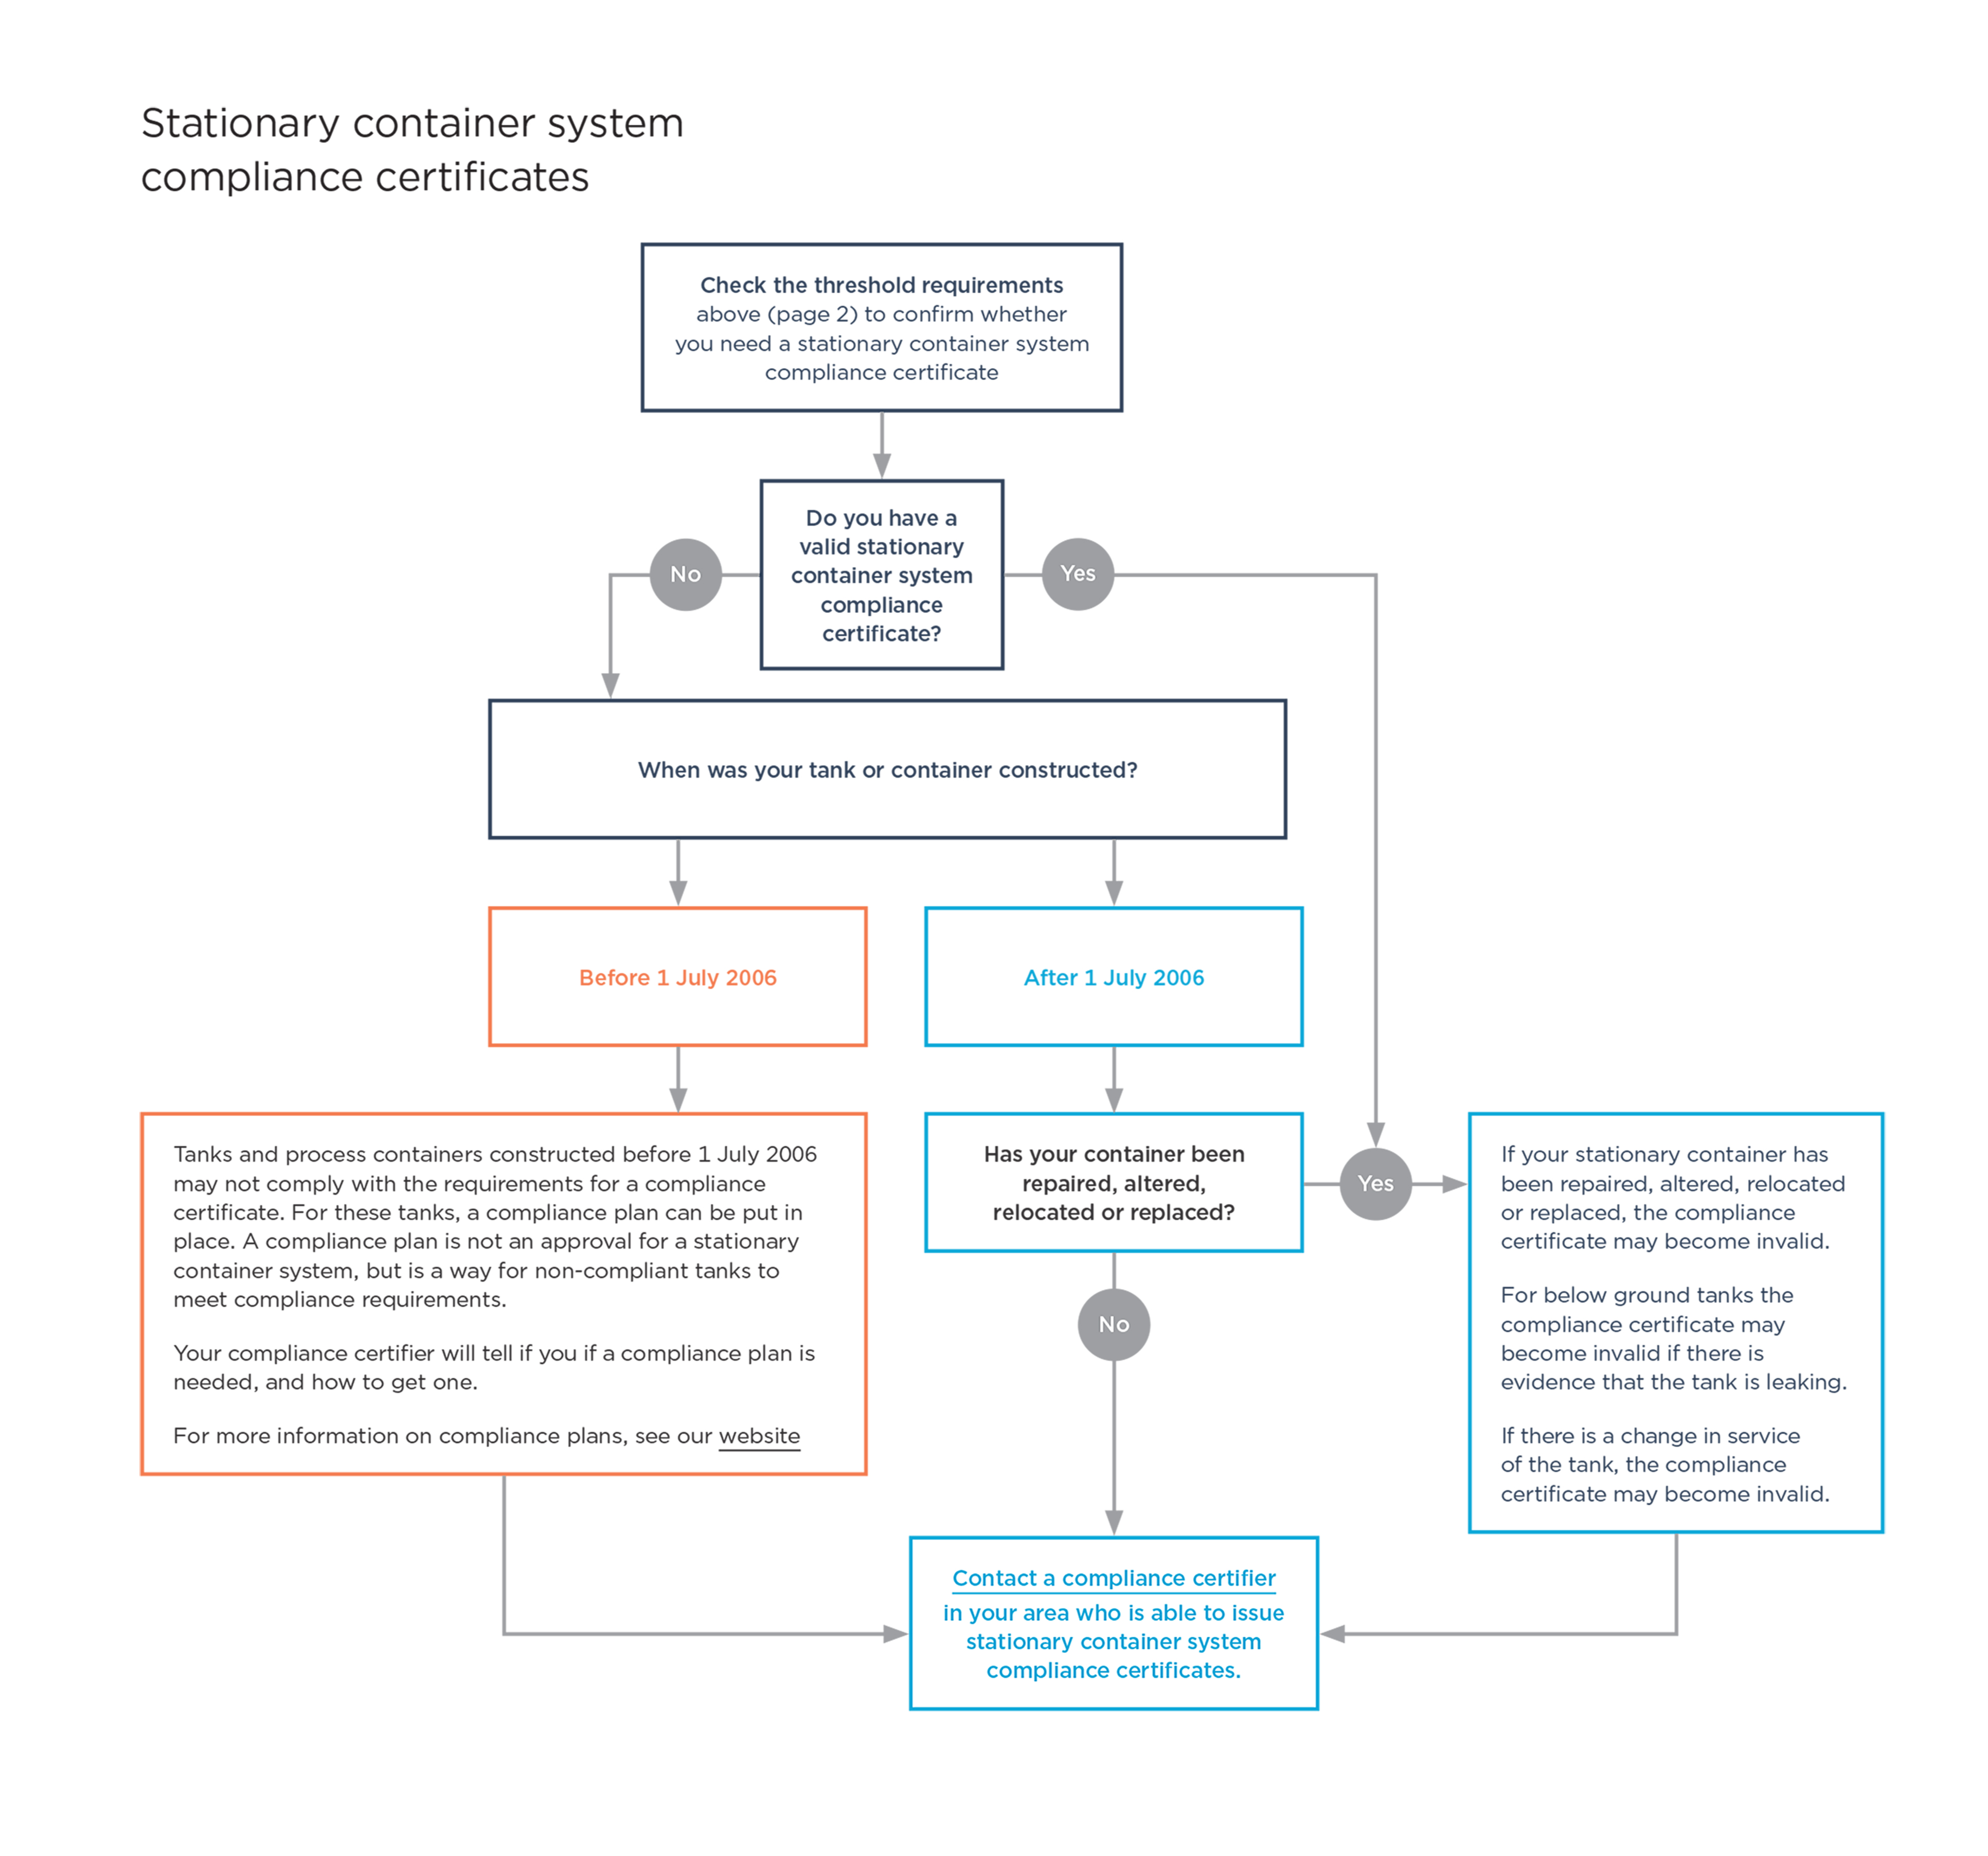 [image] flow chart showing the process for getting a stationary container system compliance certificate